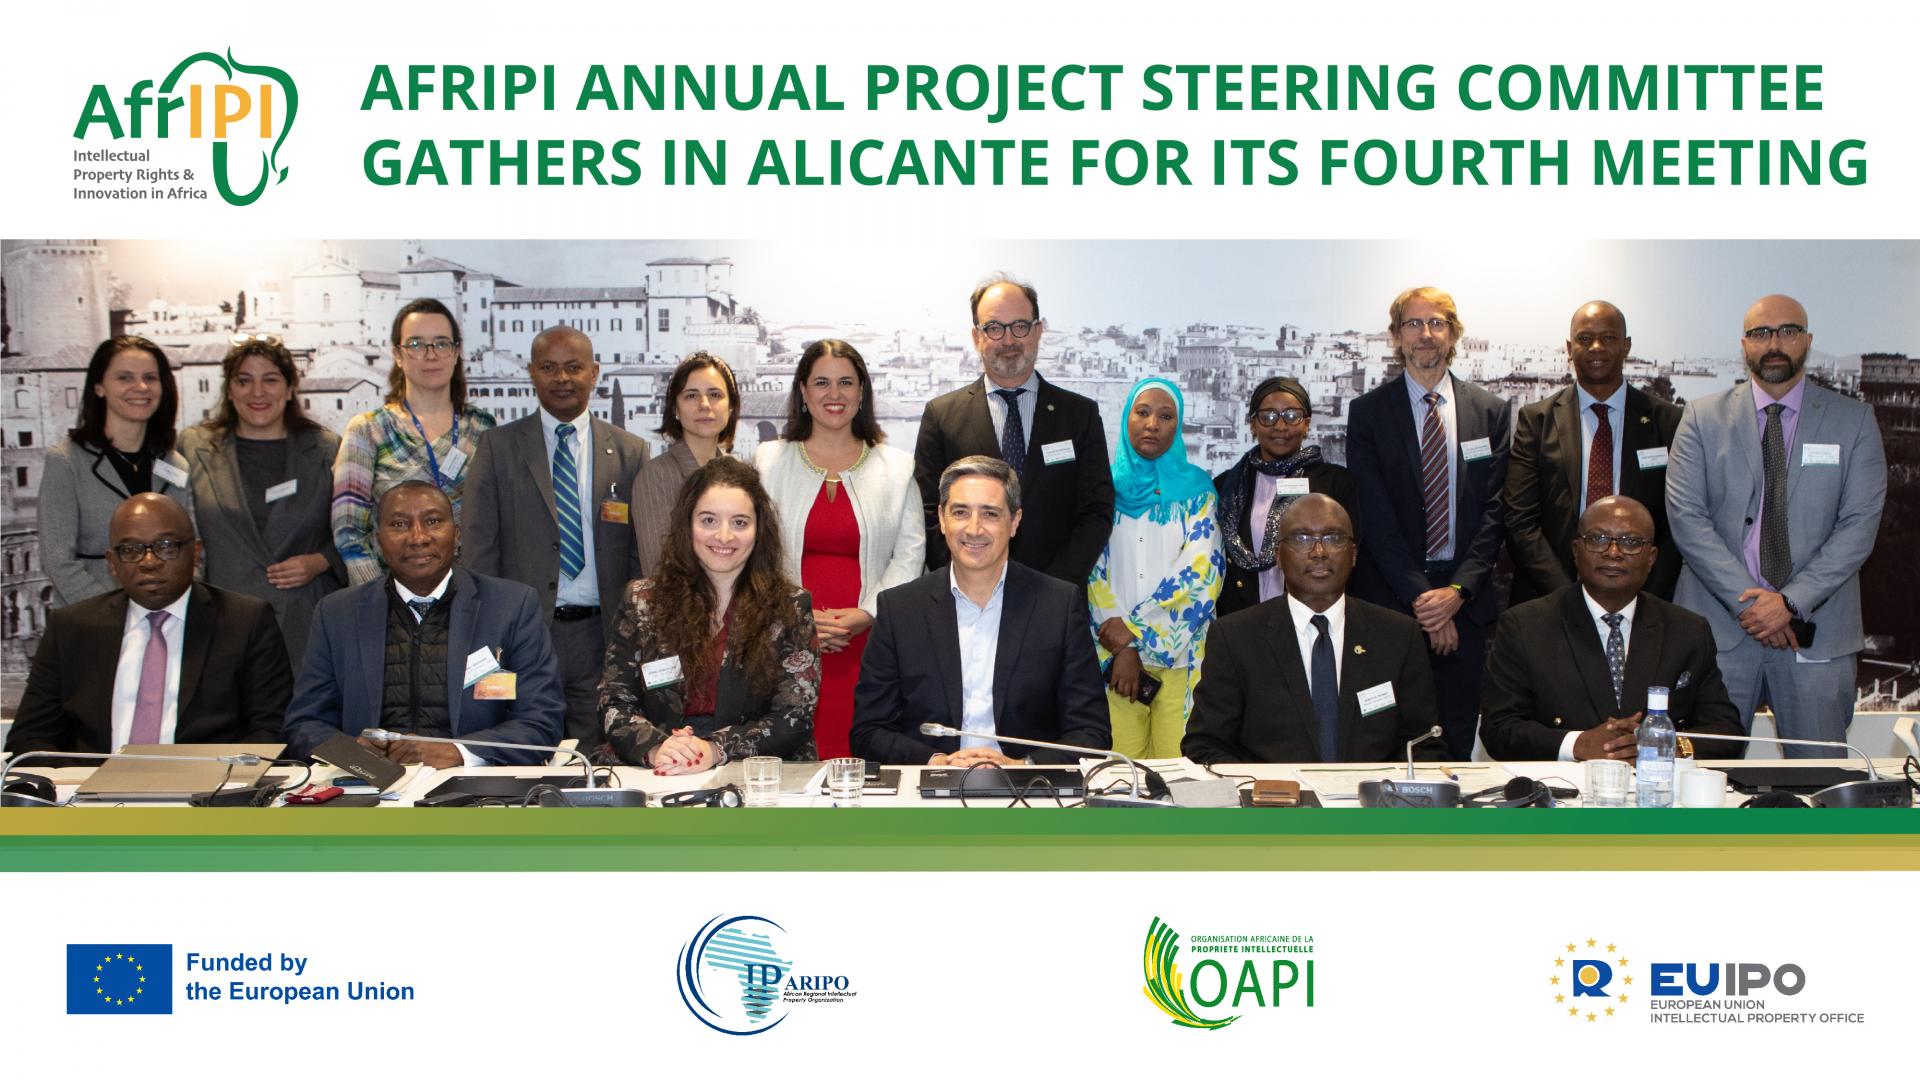 AfrIPI Annual Project Steering Committee gathers in Alicante for its fourth meeting